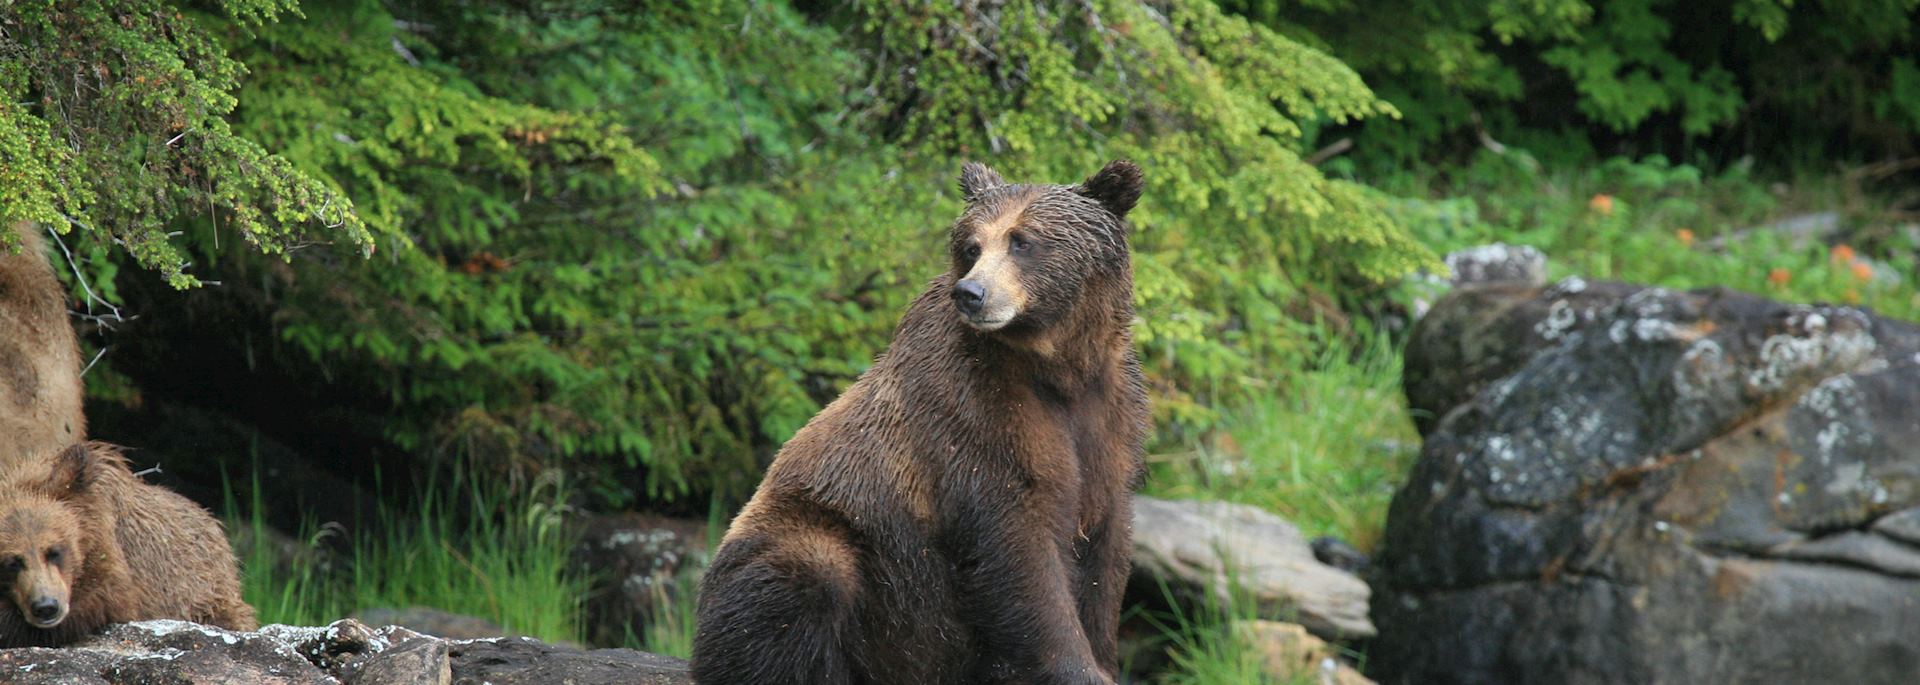 Grizzly bear, Prince Rupert